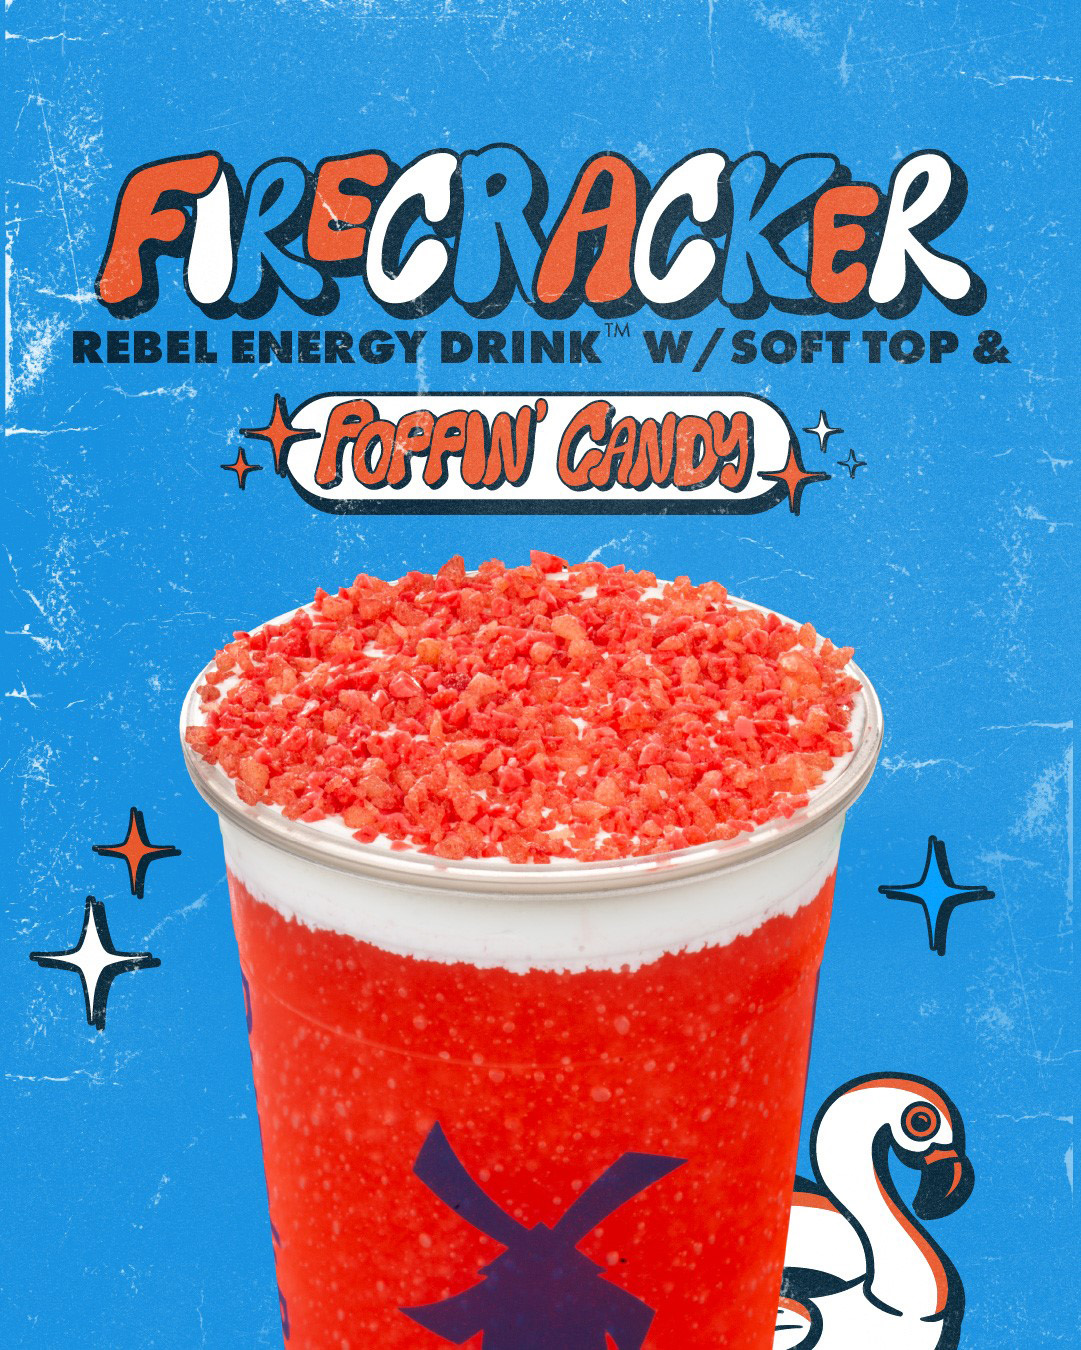 The Firecracker Rebel is full of flavor and color featuring our exclusive Rebel energy drink and red raspberry flavor, topped with Soft Top and new Poppin' Candy!